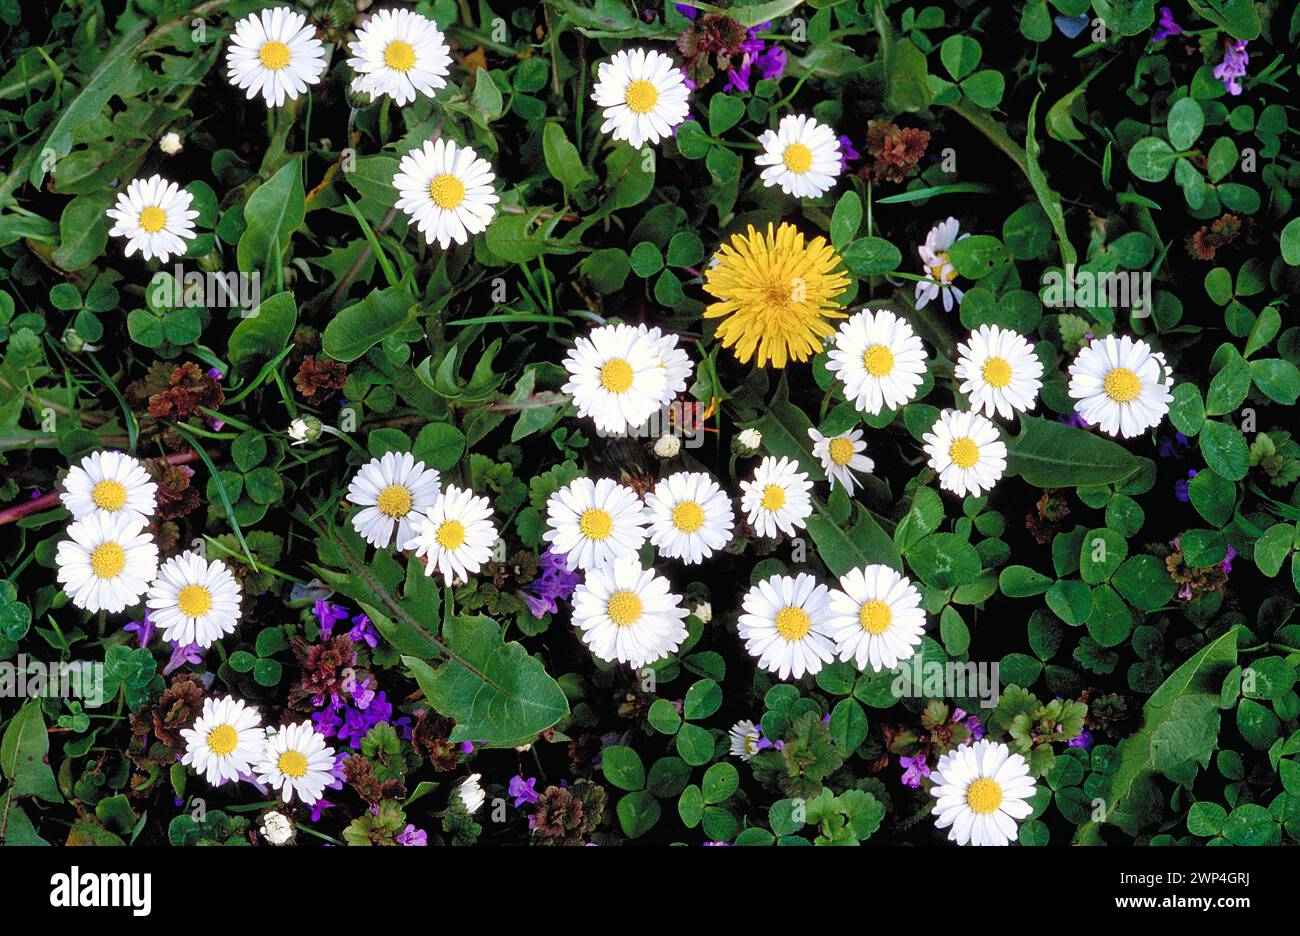 A cluster of daisies Bellis perennis and a dandelionTaraxacum surrounded by green leaves Stock Photo